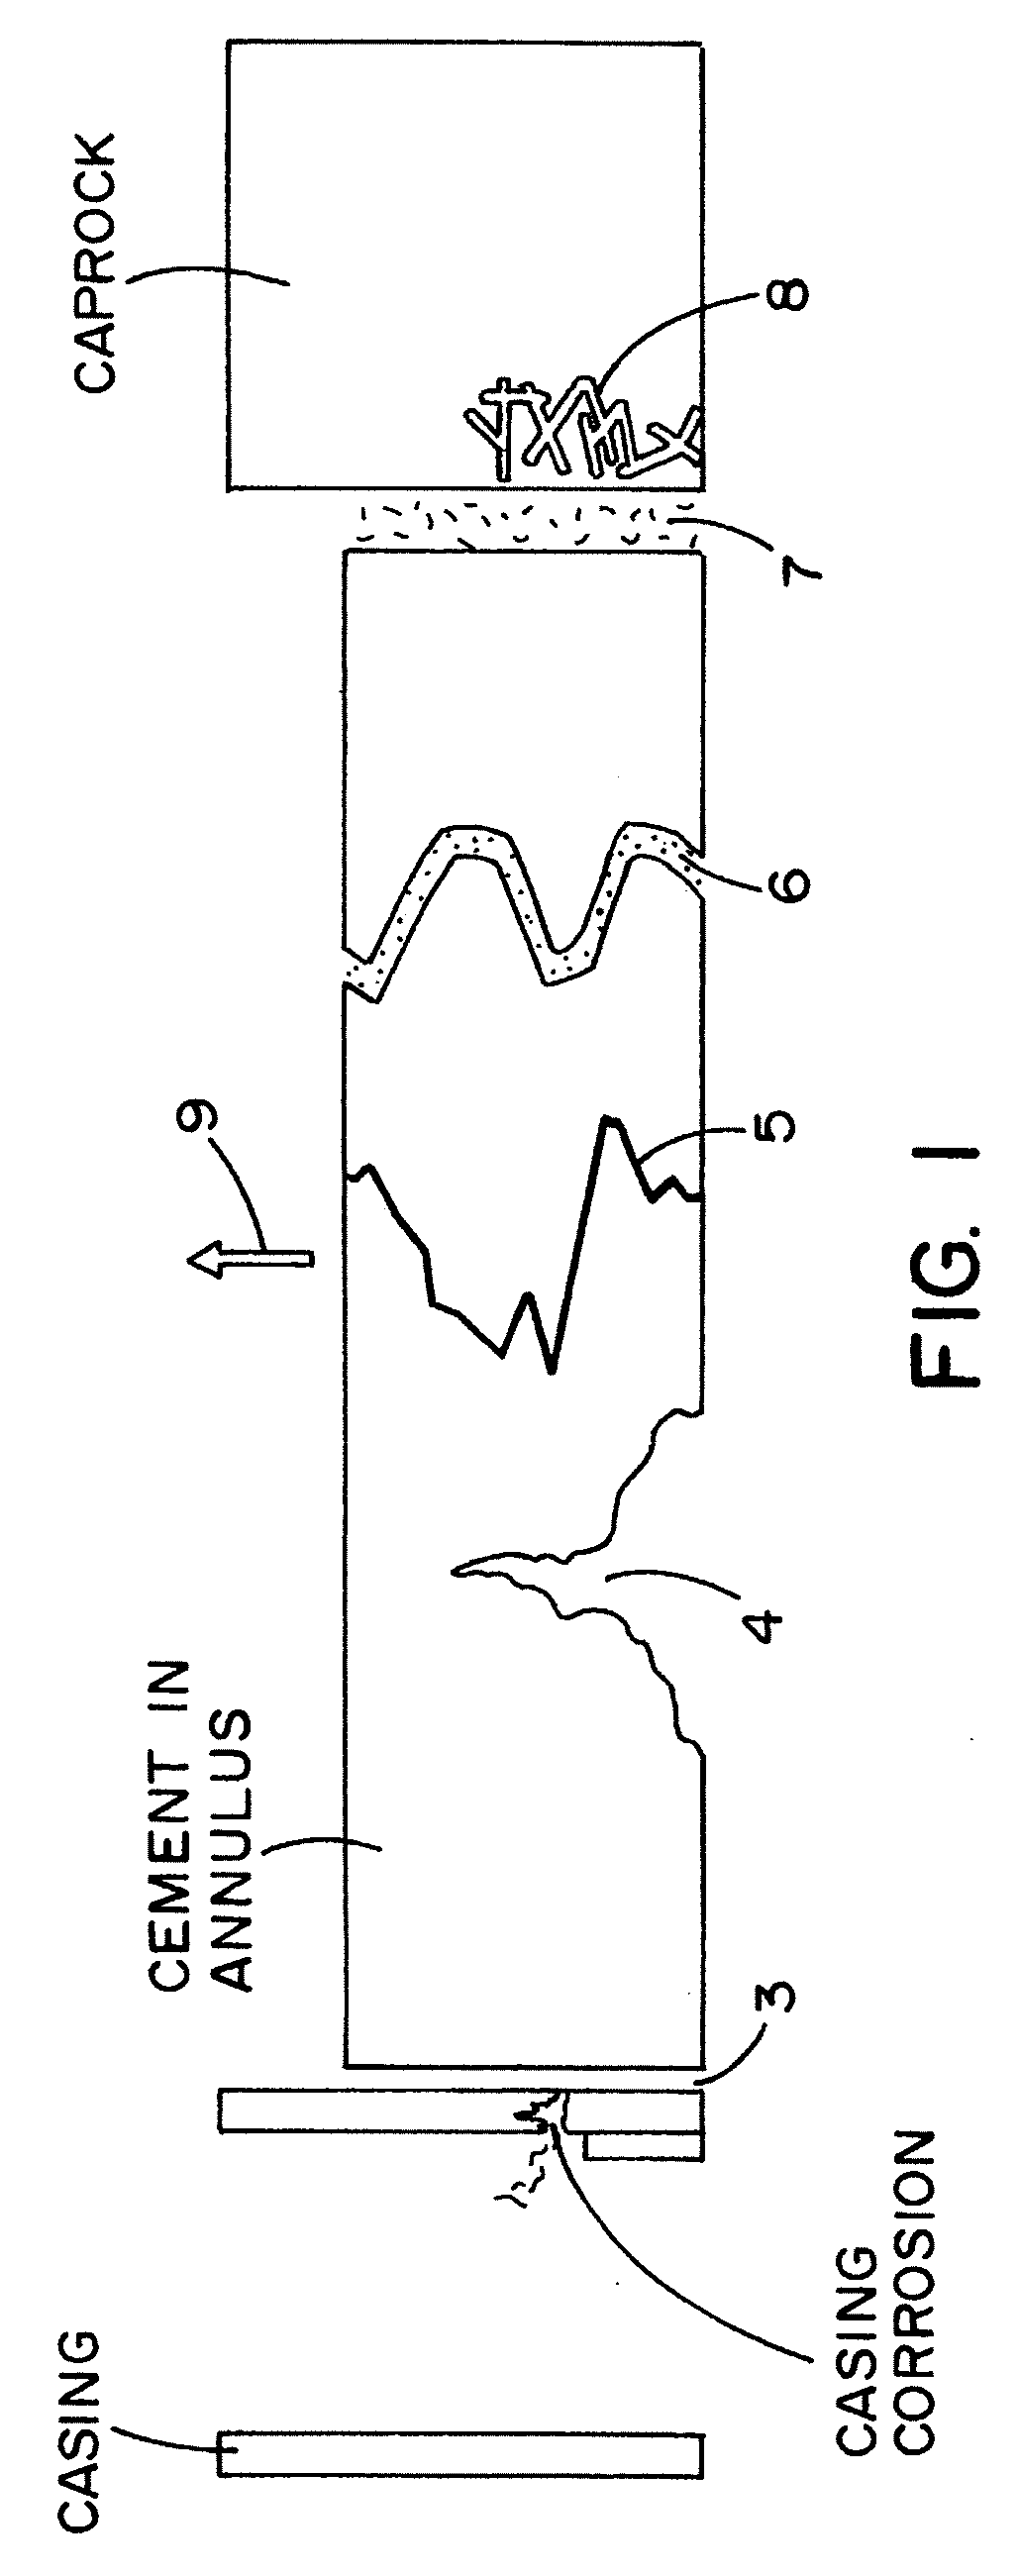 Method of Improving Wellbore Integrity and Loss Control